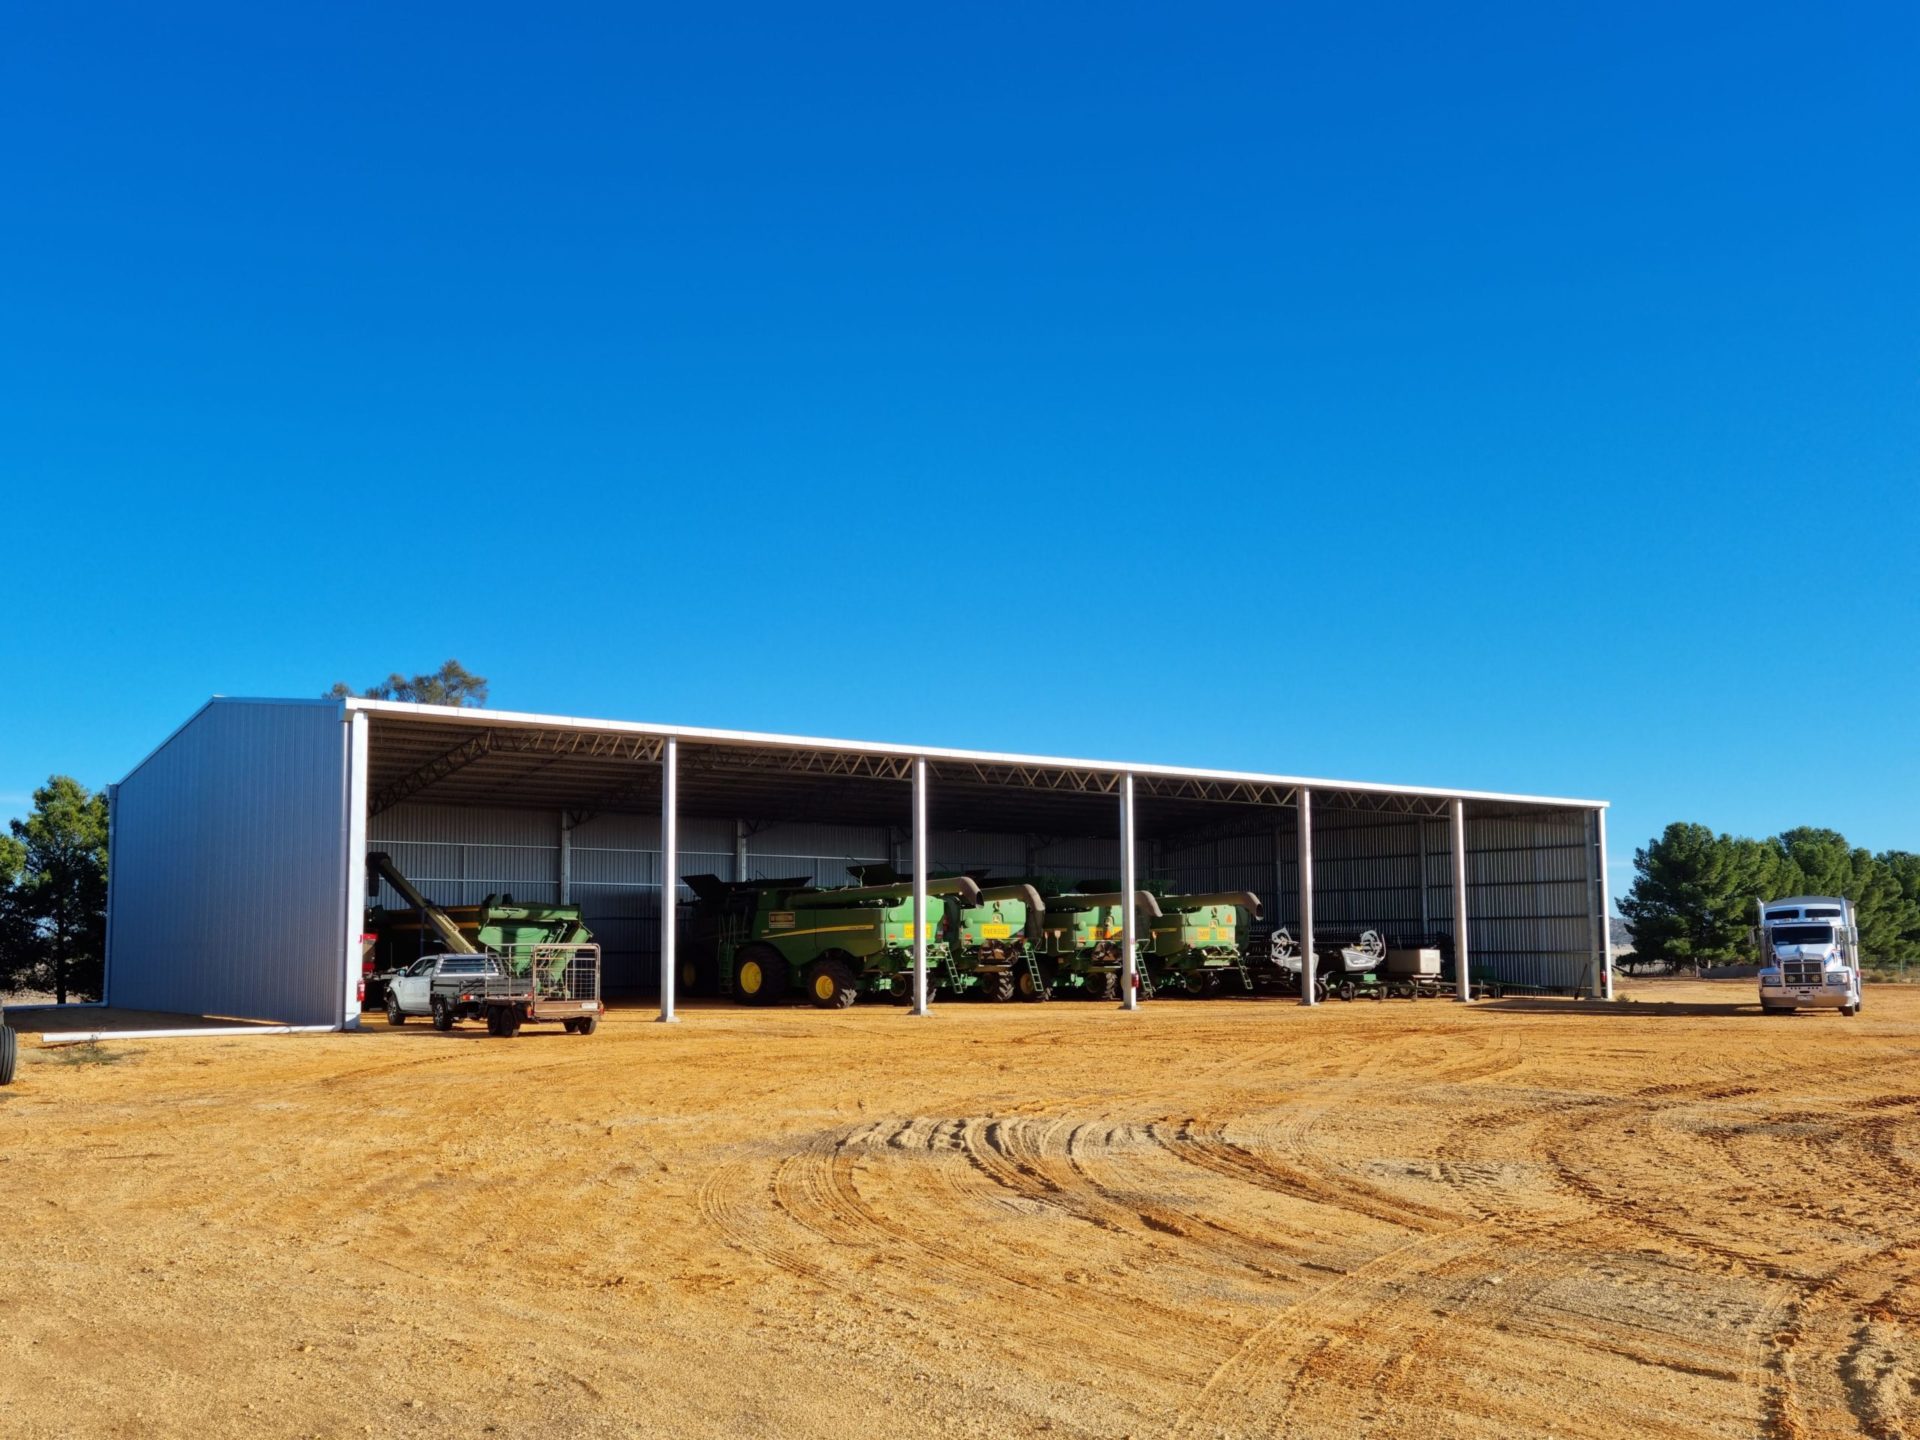 You are currently viewing 49.5m x 24m x 7.5m open-front machinery shed